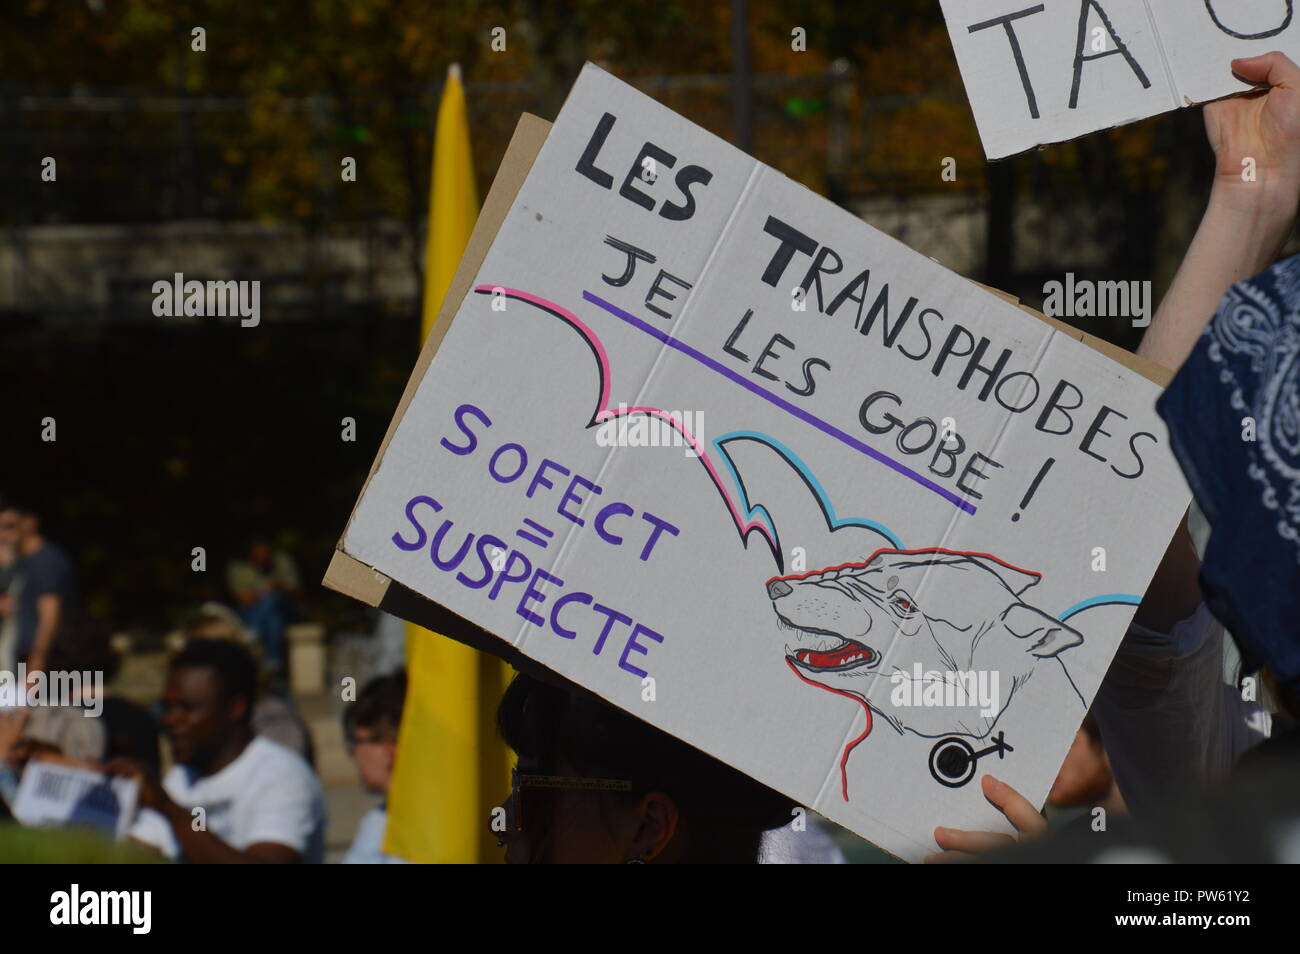 Paris, France. March ExisTrans for the rights of transexual people. Place Stalingrad, Paris, France. 13 October 2018. 14h.  ALPHACIT NEWIM / Alamy Live News Stock Photo